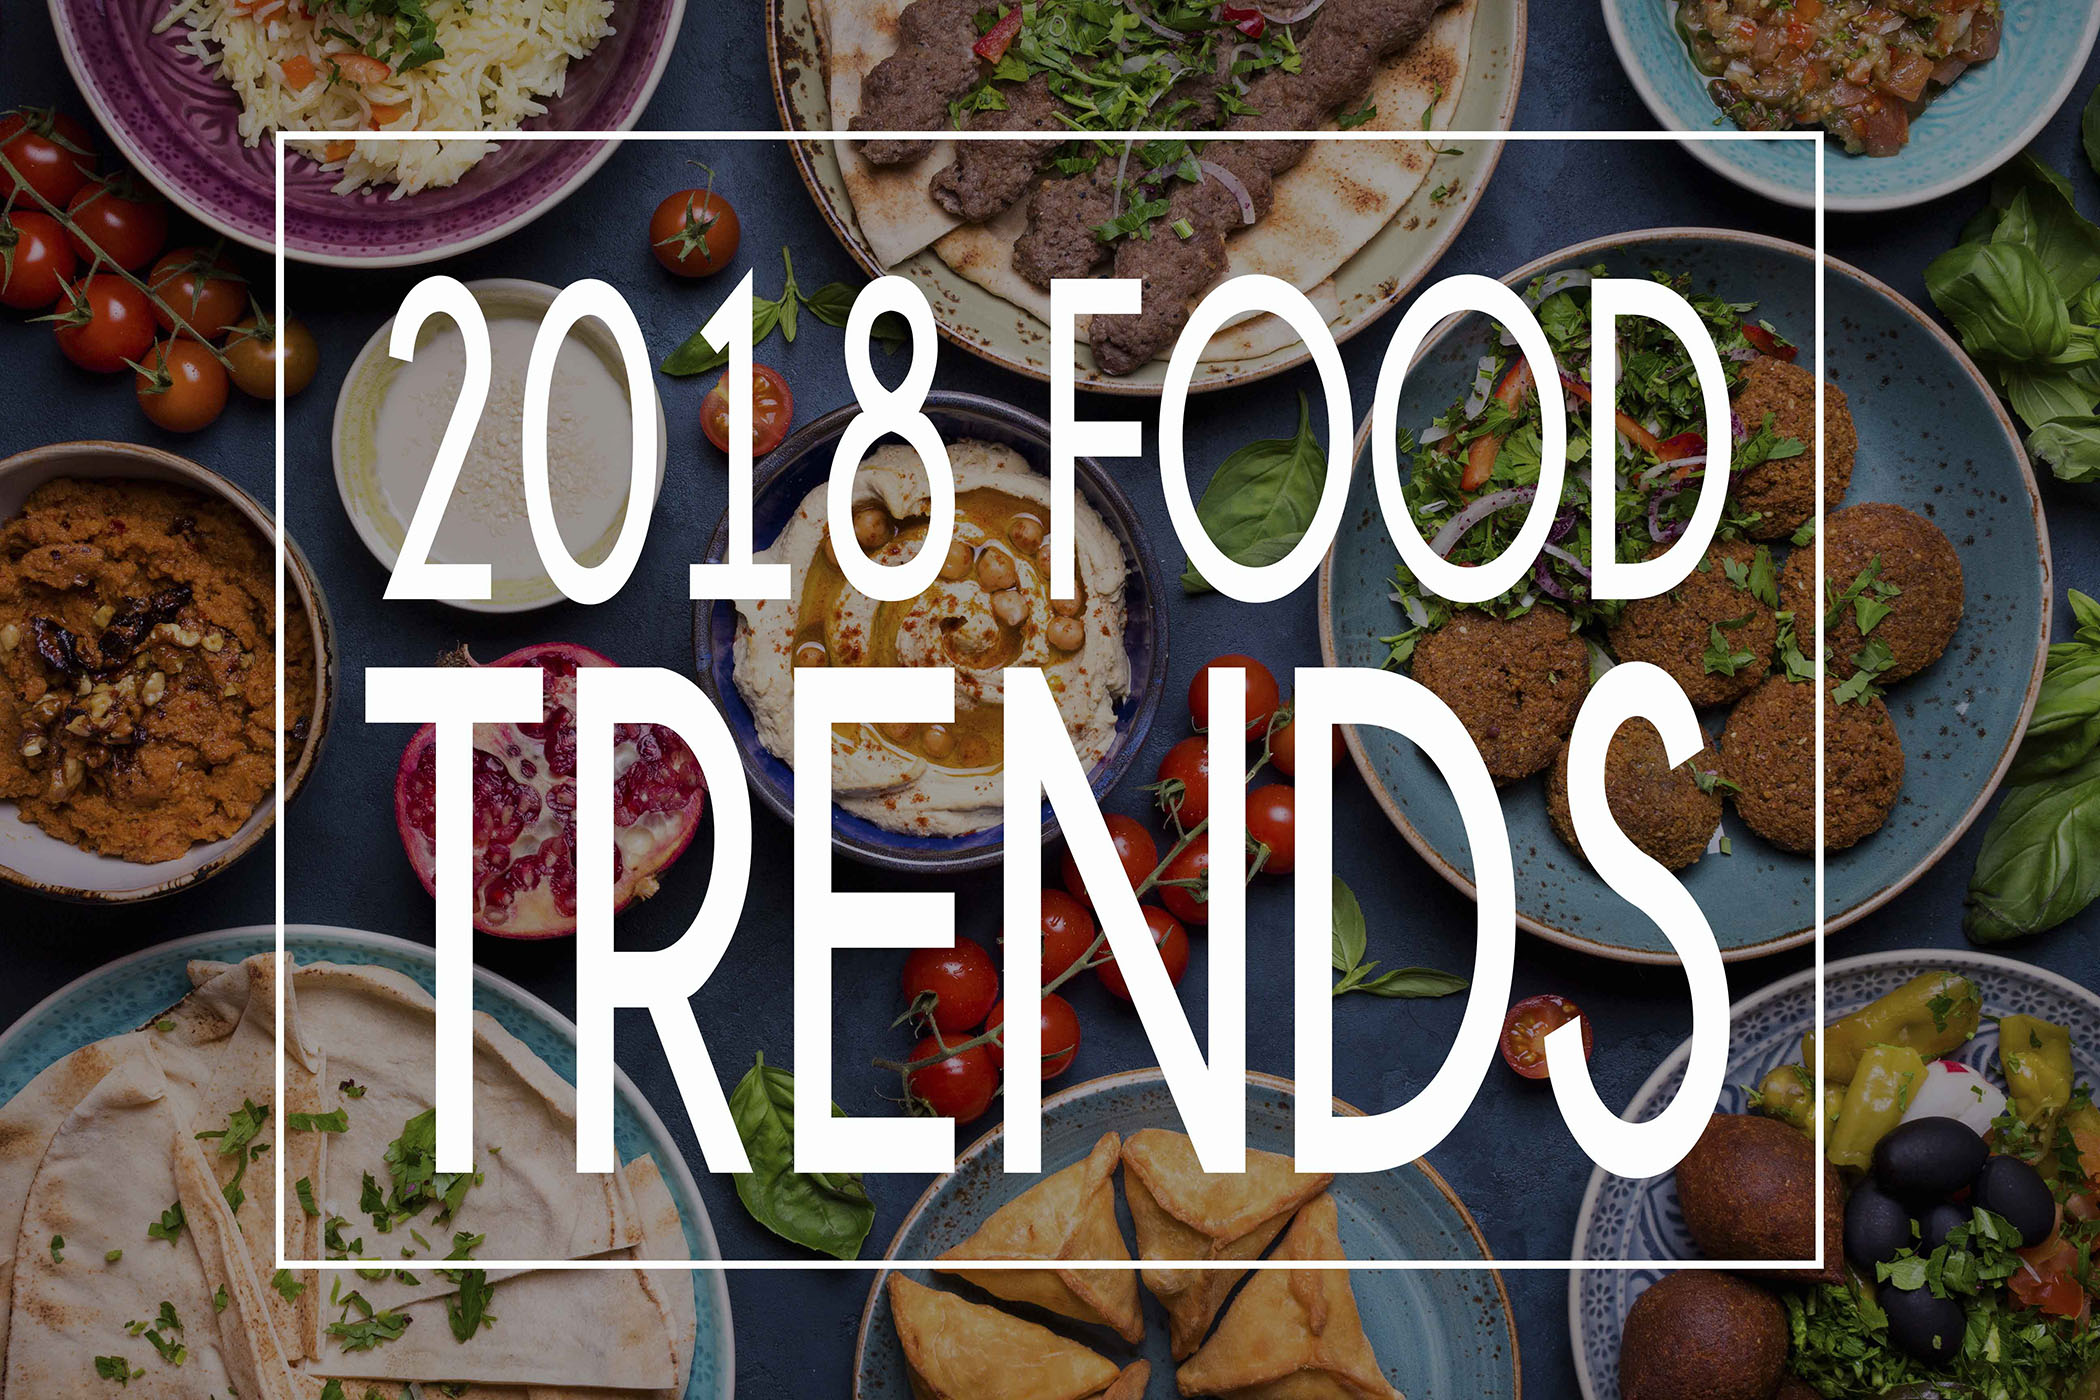 FAPC selects top 10 food trends for 2018